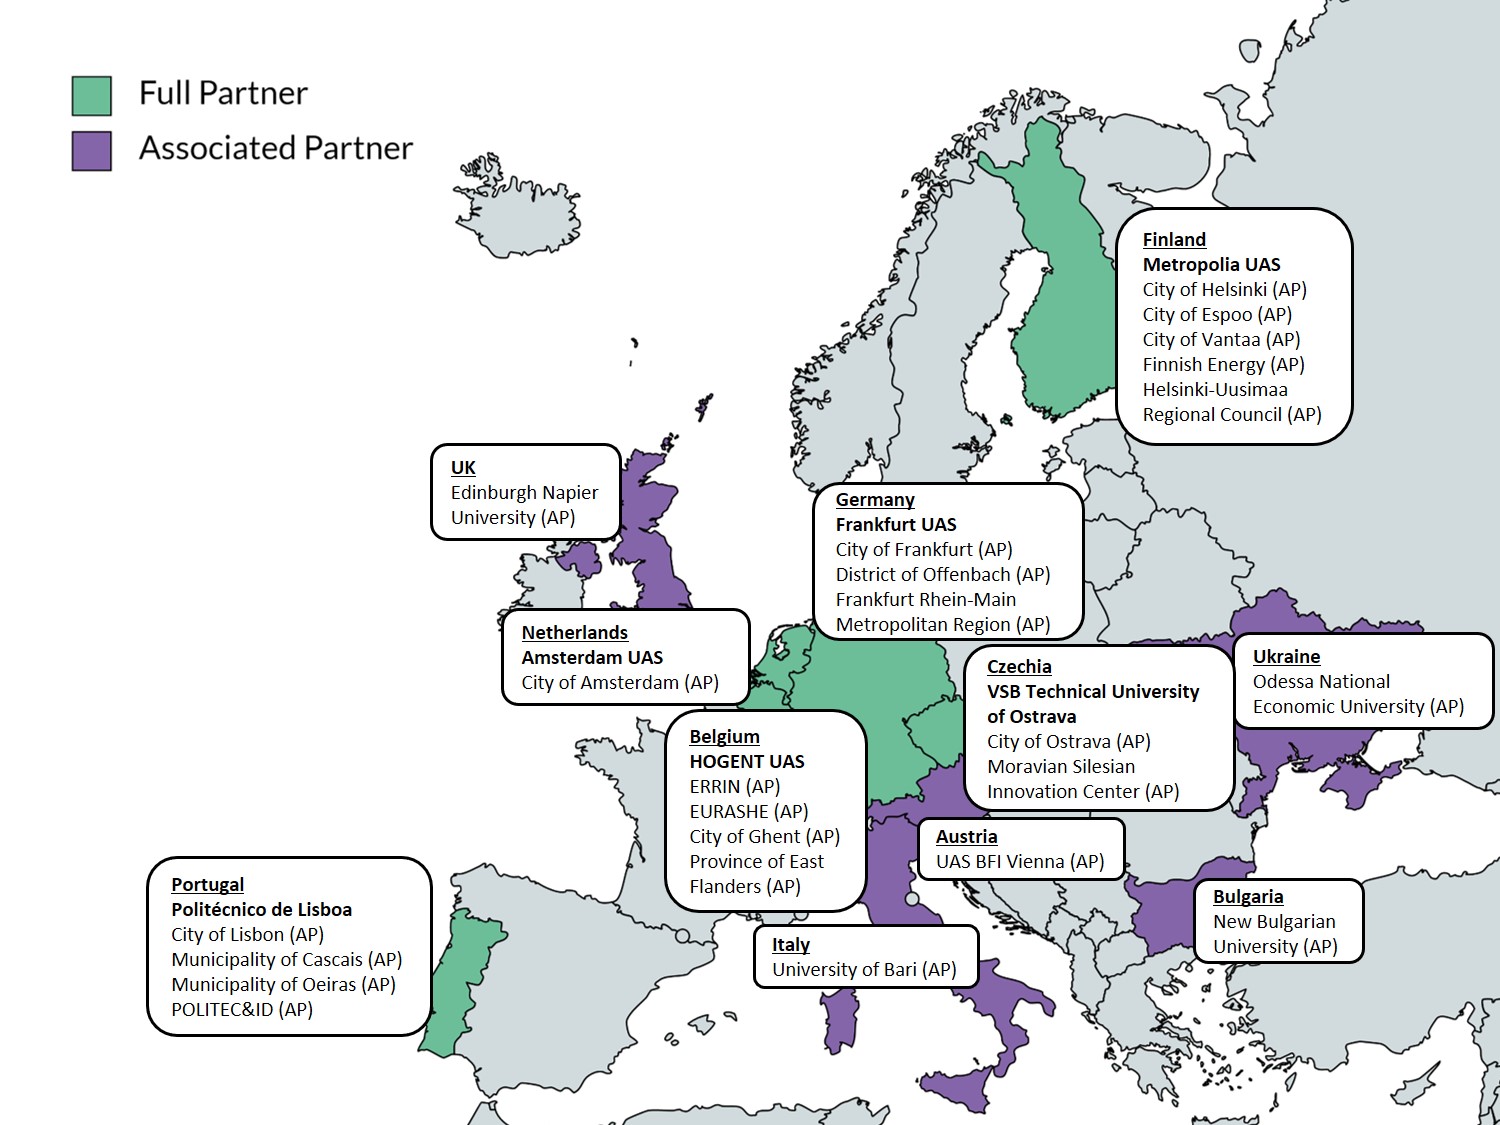 U!REKA consortium map with full partners from Finland, Germany, Netherlands, Belgium, Czechia and Portugal, along with associated partners from United Kingdom, Ukraine, Austria, Bulgaria and Italy